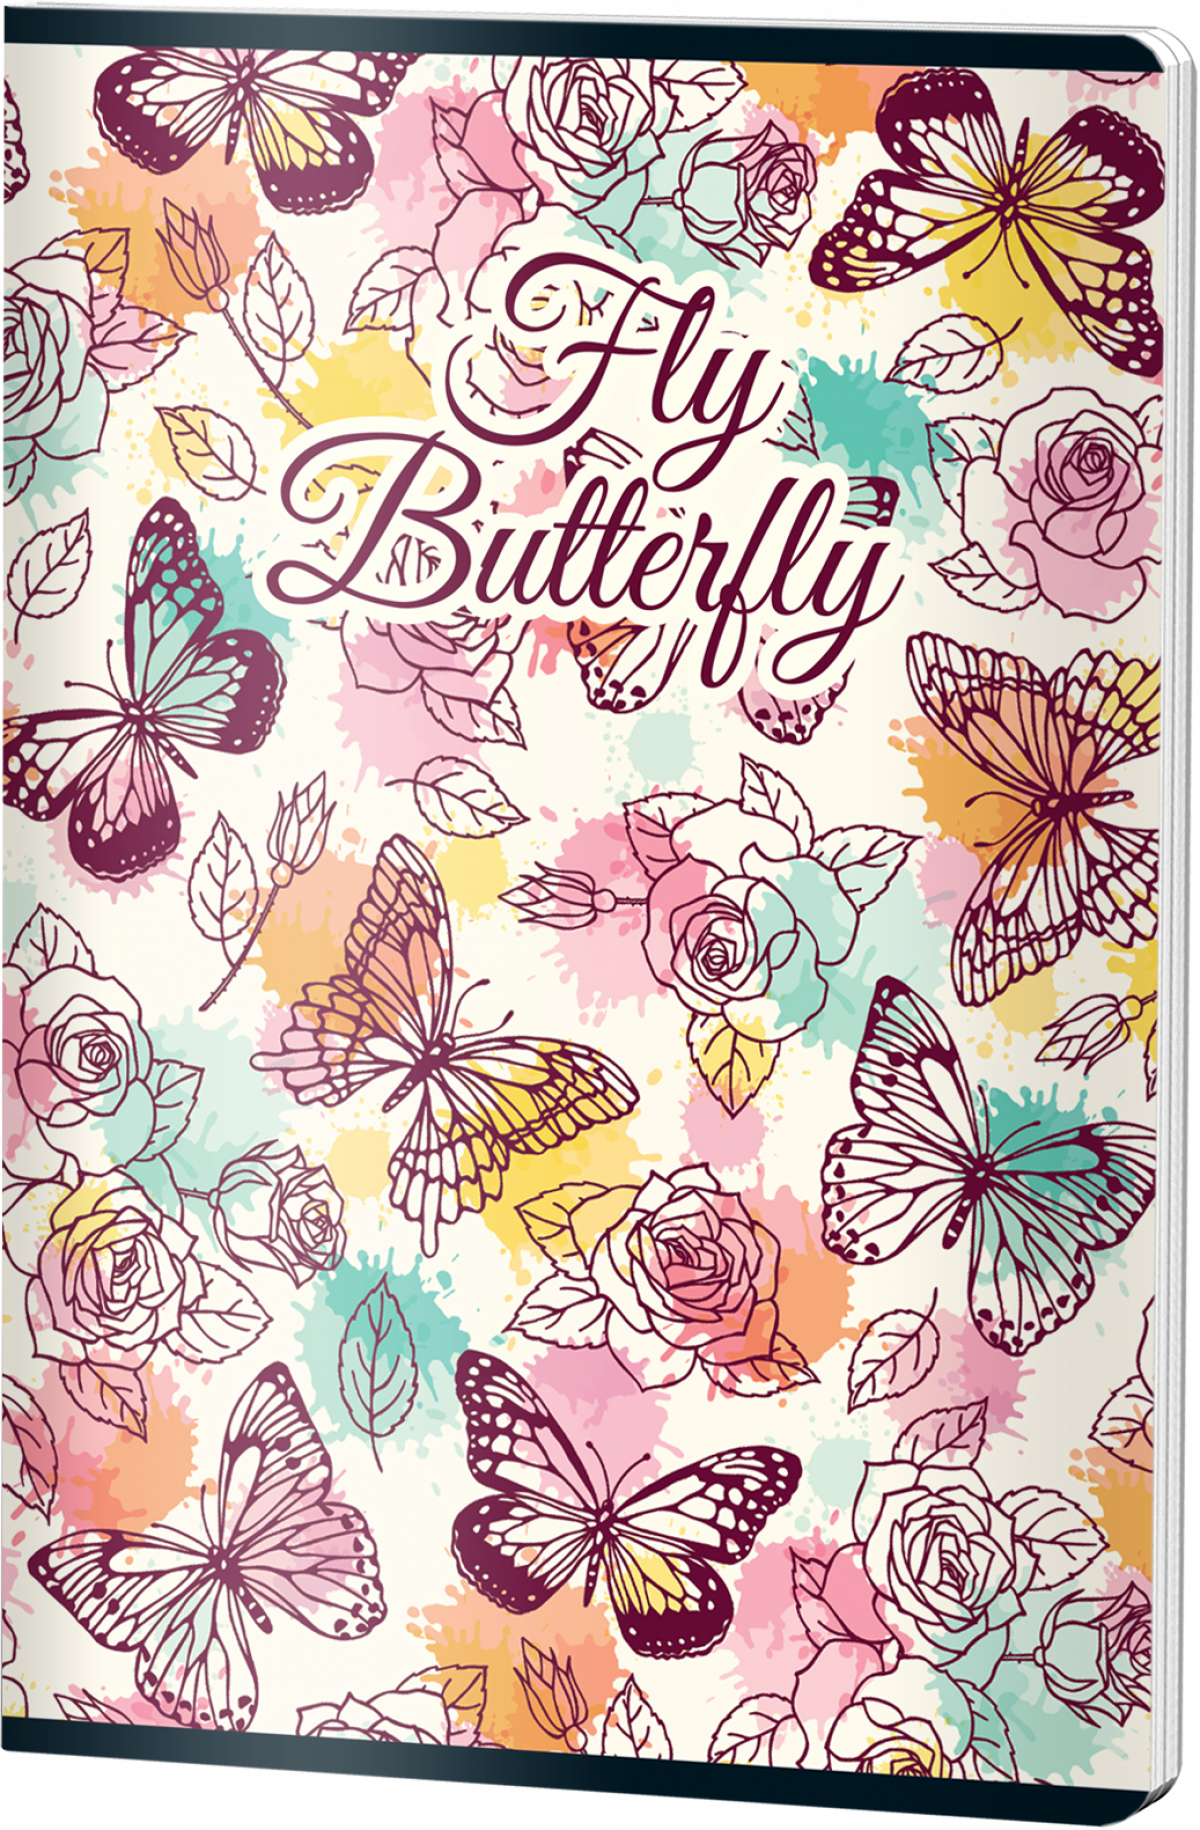 Caiet Matematica, A4 Studentesc, Pigna Clasic, 80file, 60 gr, FETE, FLY BUTTERFLY